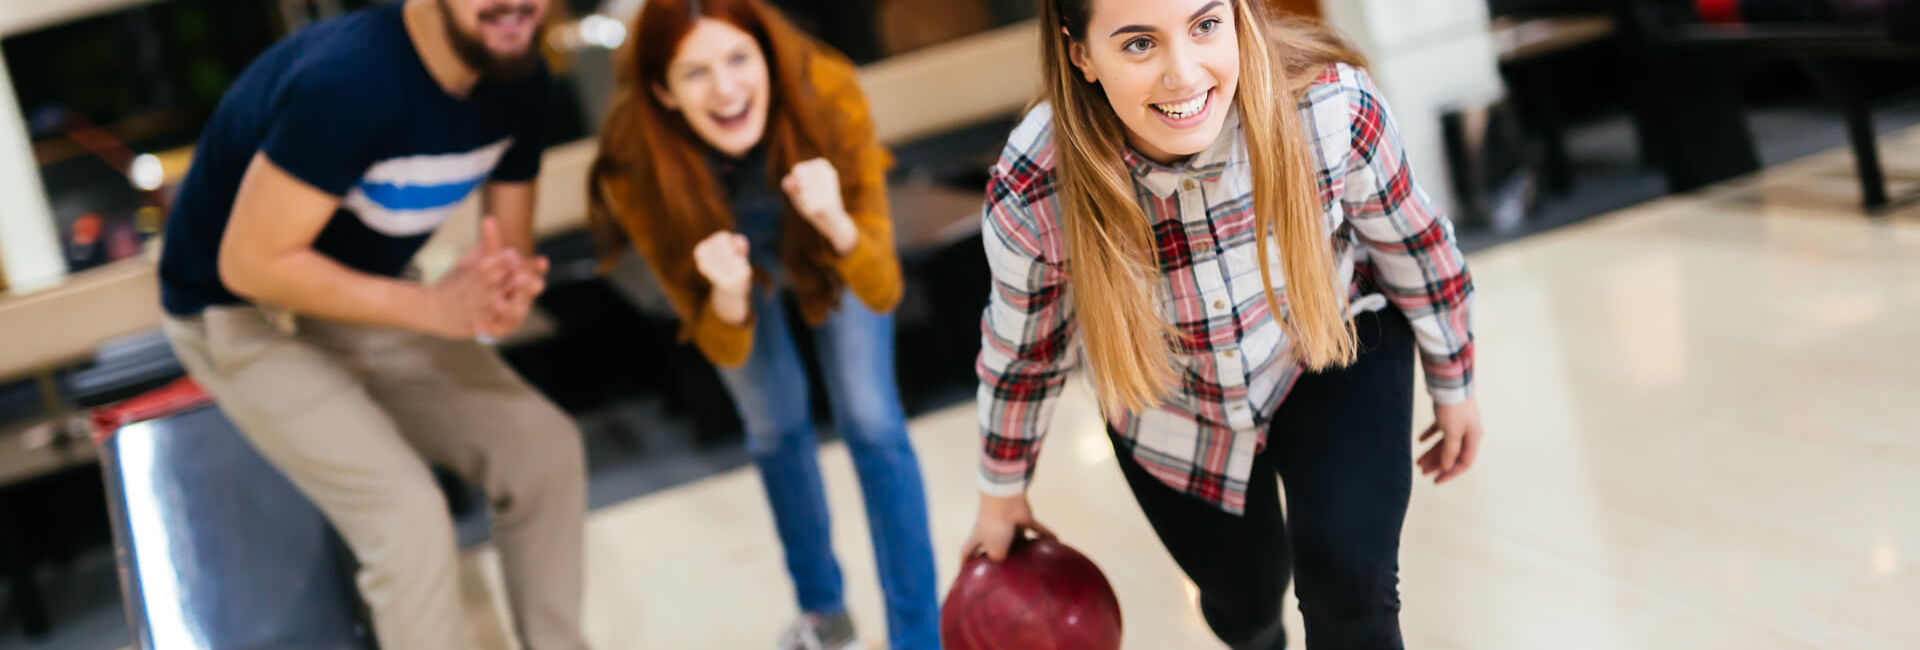 Female bowling while friends cheering